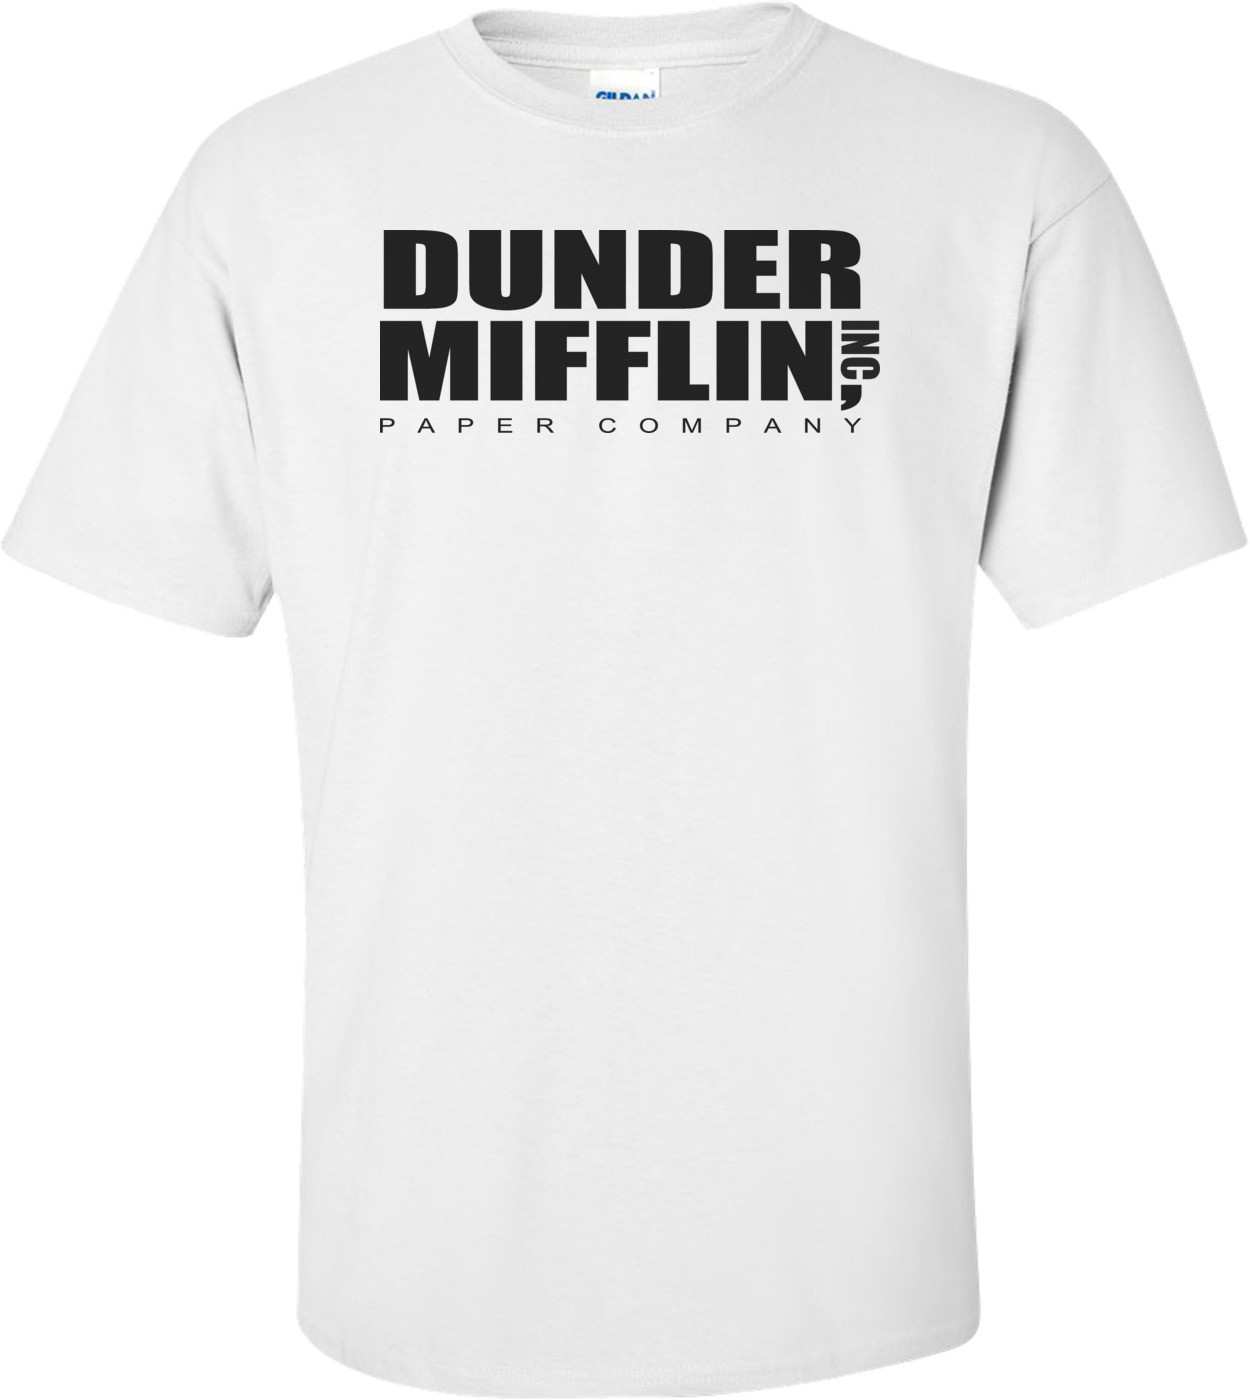 Dunder Miflin Paper Company - The Office t-Shirt